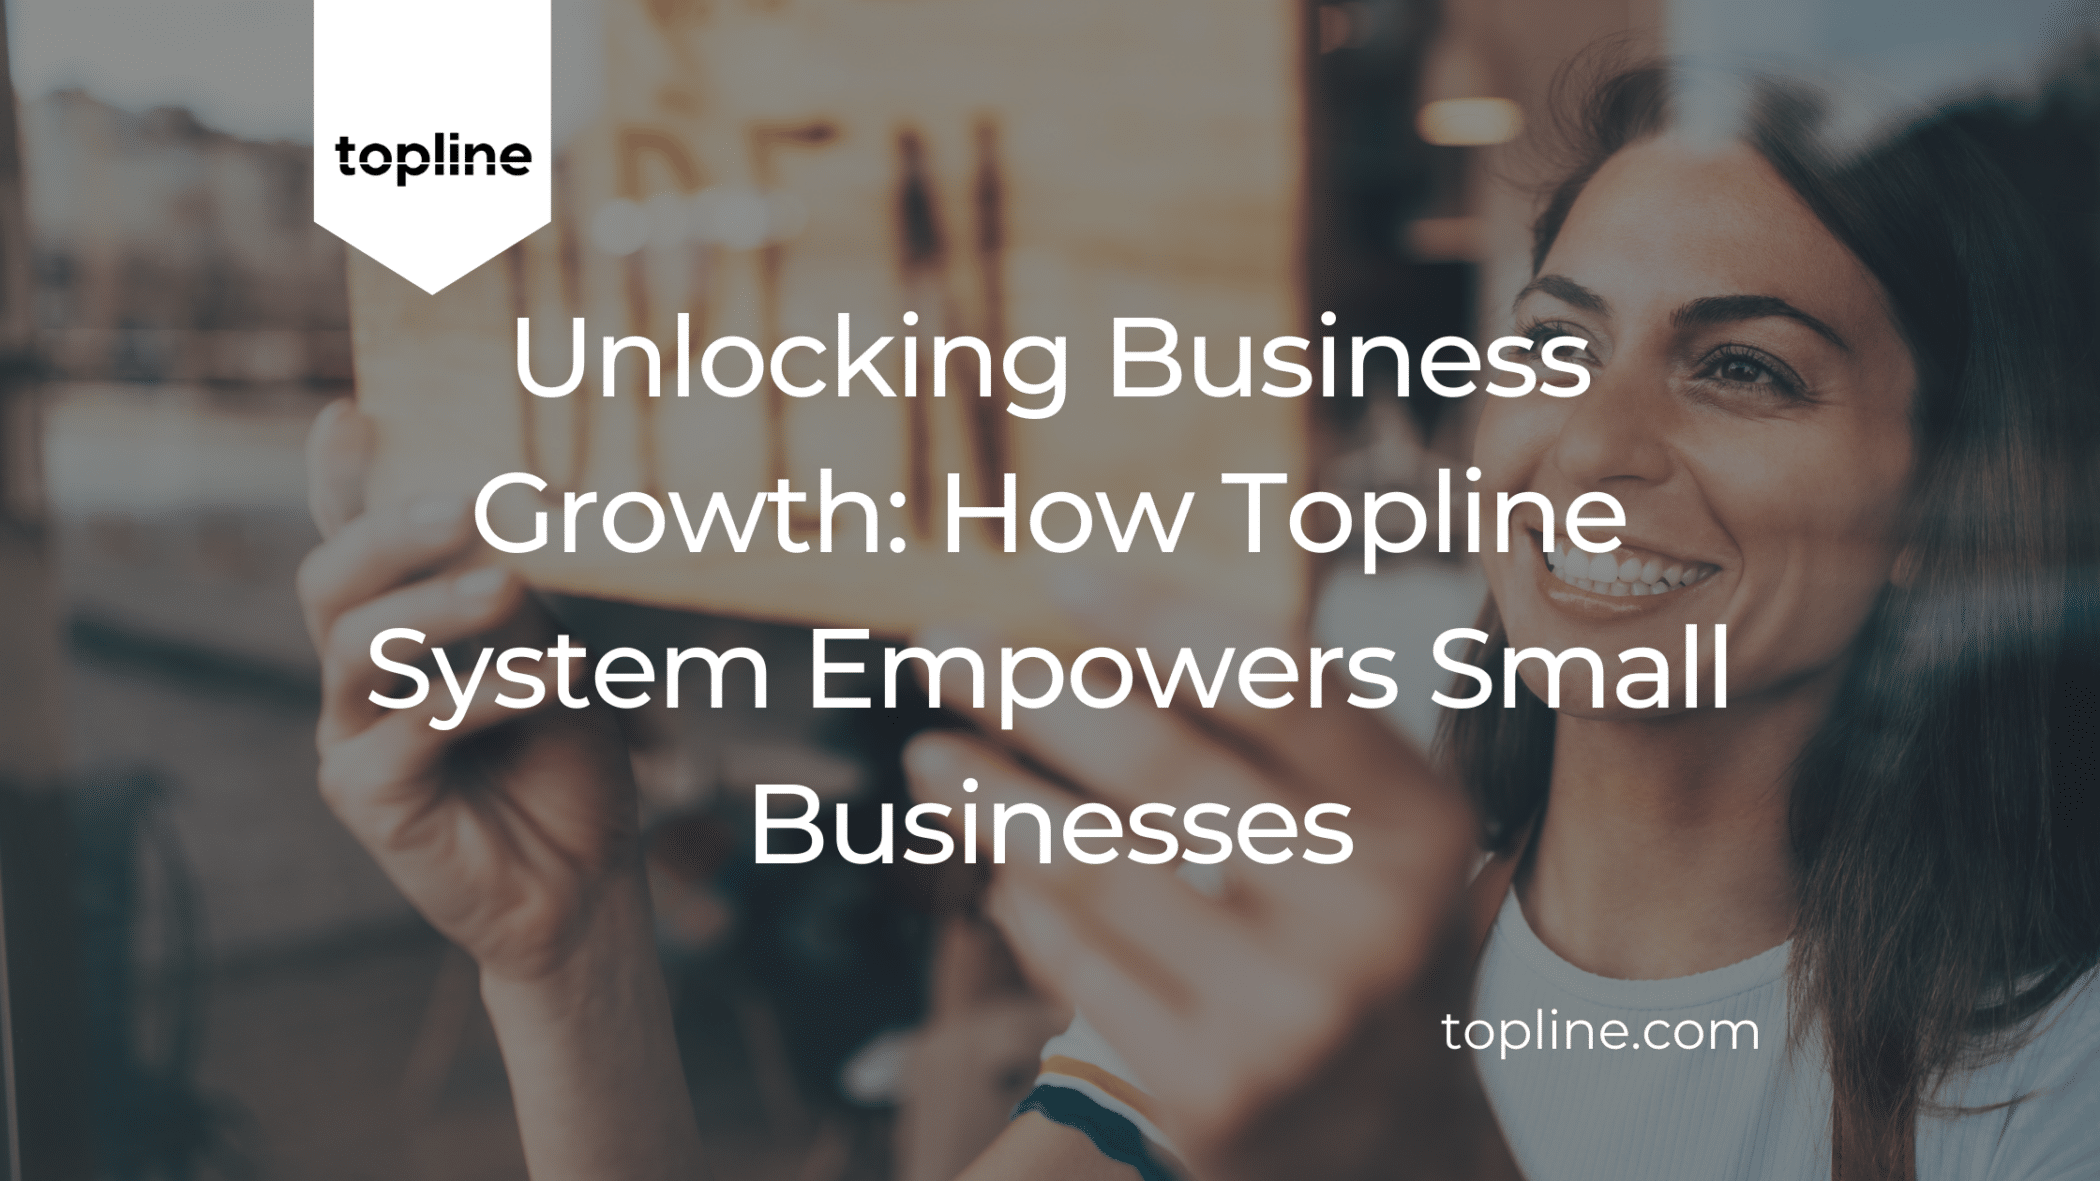 Unlocking Business Growth: How Topline System Empowers Small Businesses